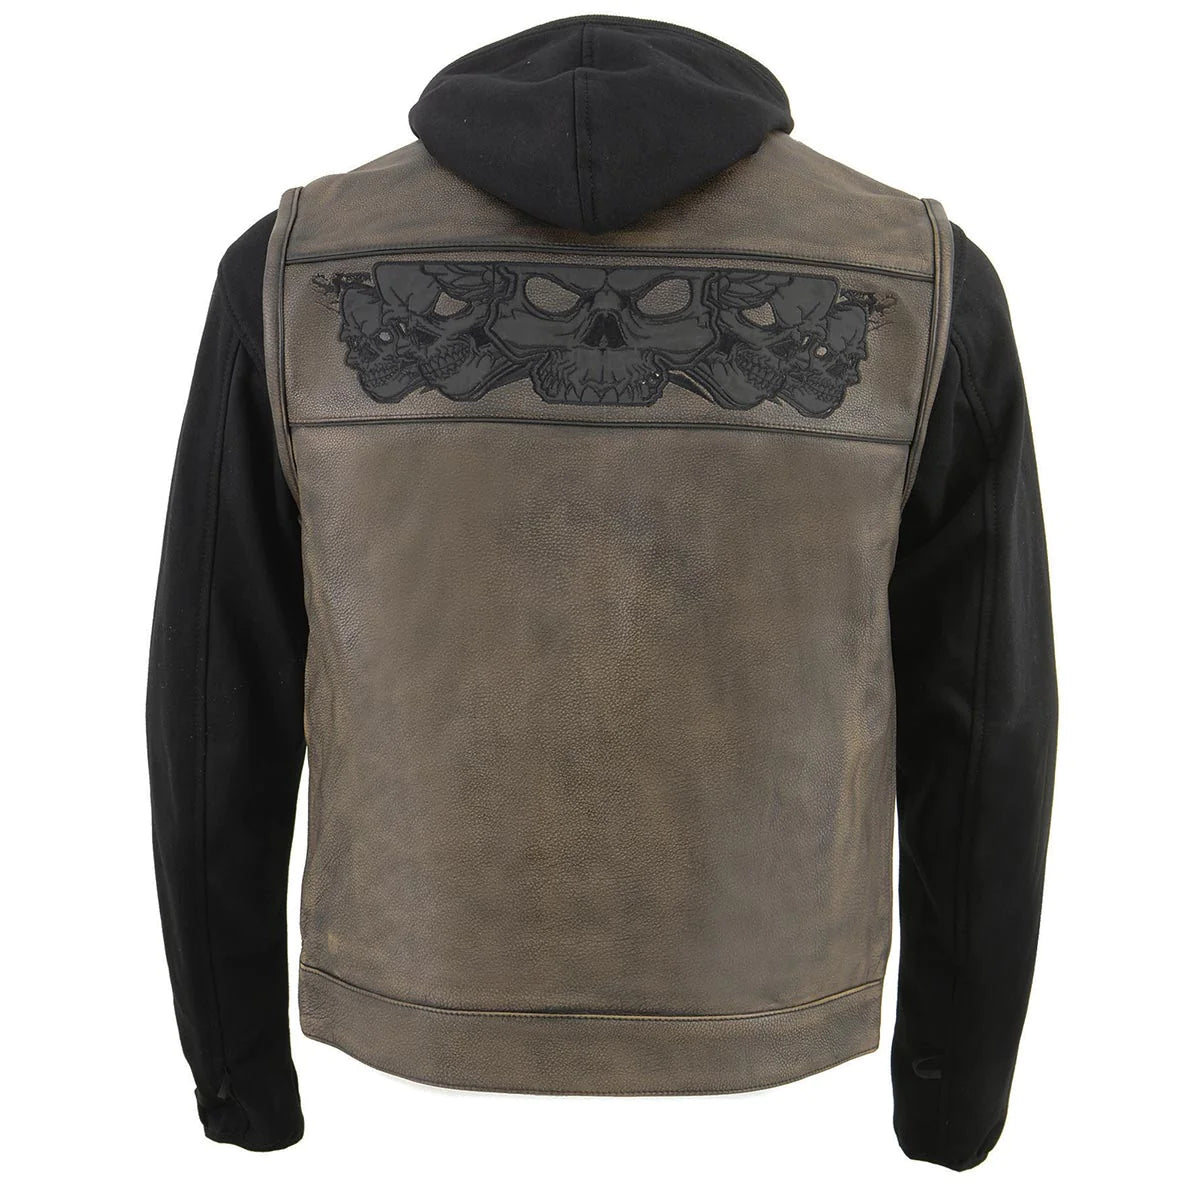 Men's '2 in 1' Distressed Brown Leather Vest with Reflective Skulls